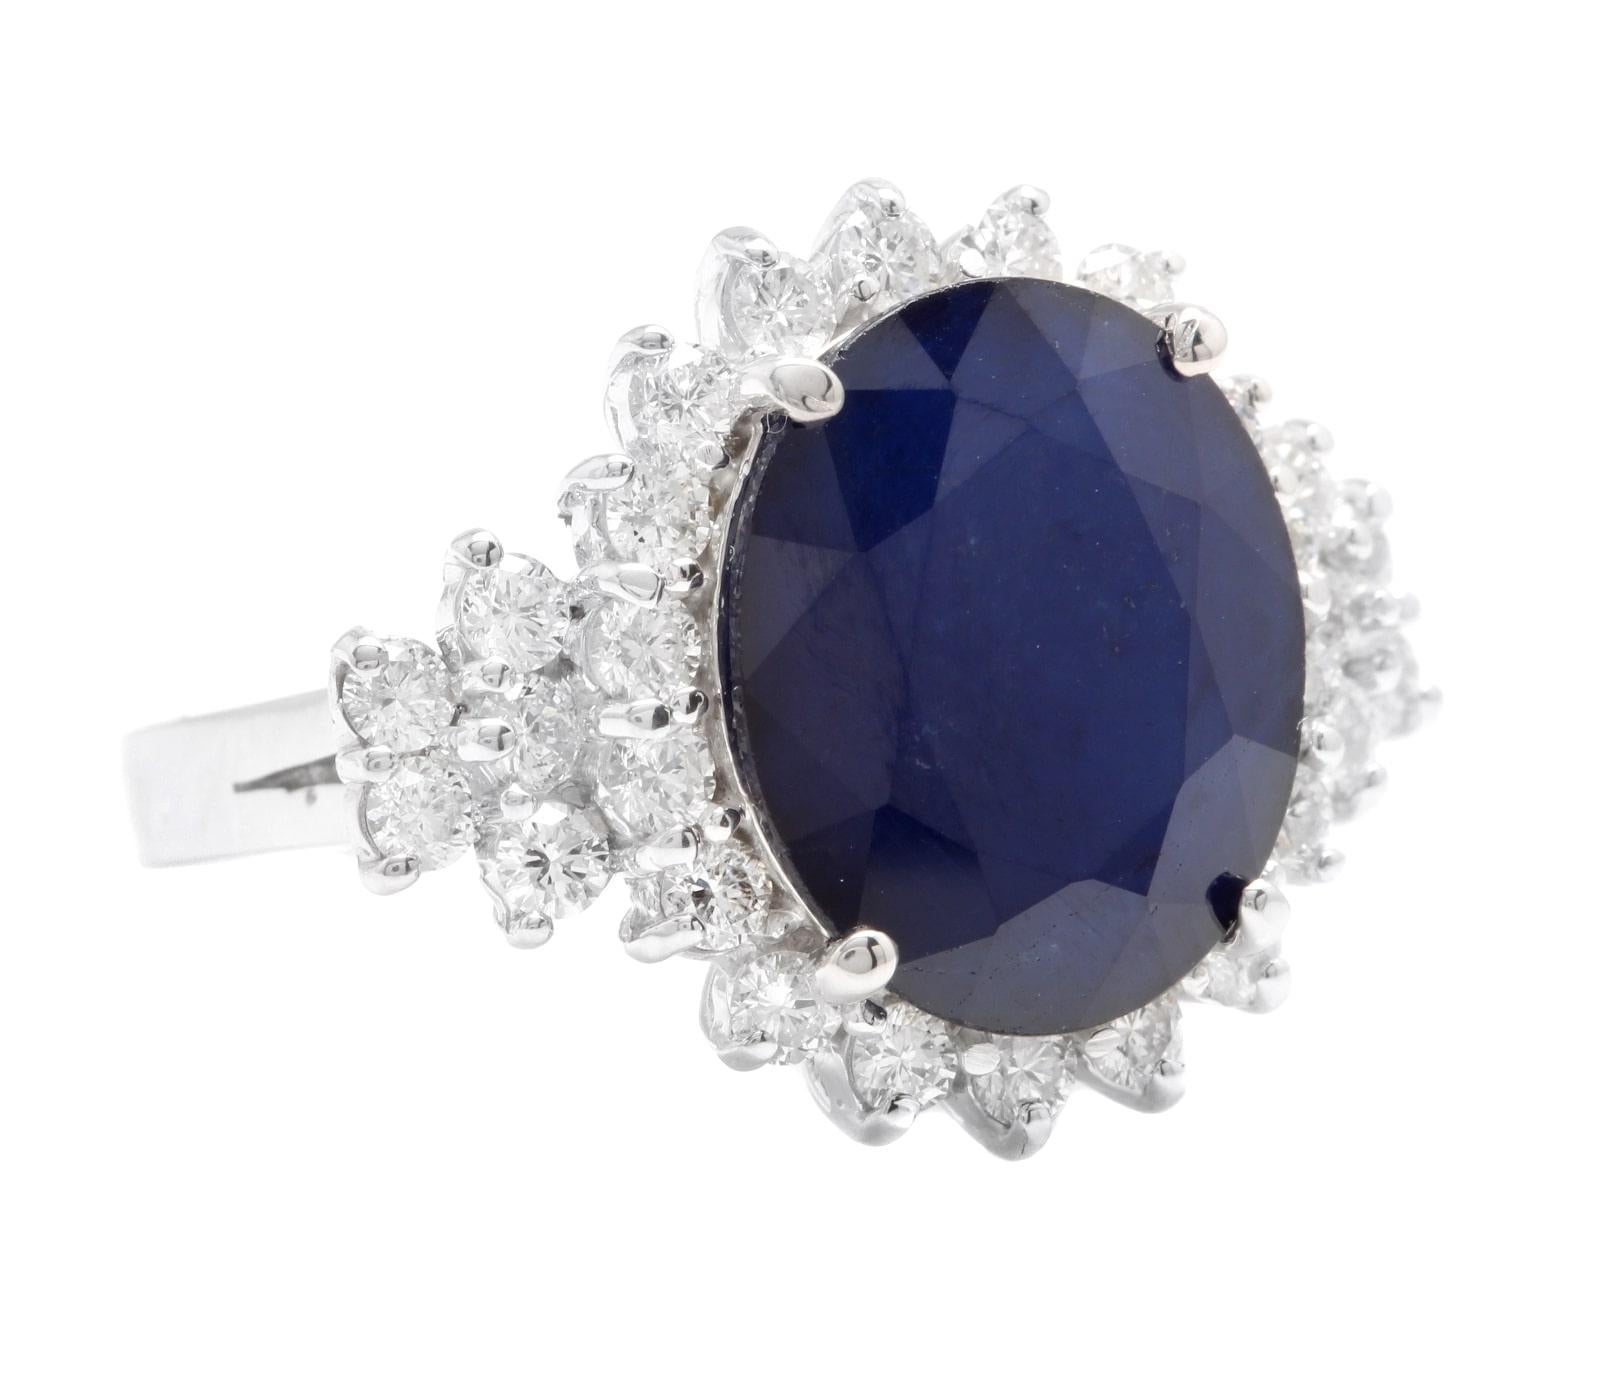 9.20 Carats Exquisite Natural Blue Sapphire and Diamond 14K Solid White Gold Ring

Suggested Replacement Value $6,500.00

Total Blue Sapphire Weight is: Approx. 8.00 Carats (Treated)

Sapphire Measures: 14.50 x 12.00mm

Natural Round Diamonds